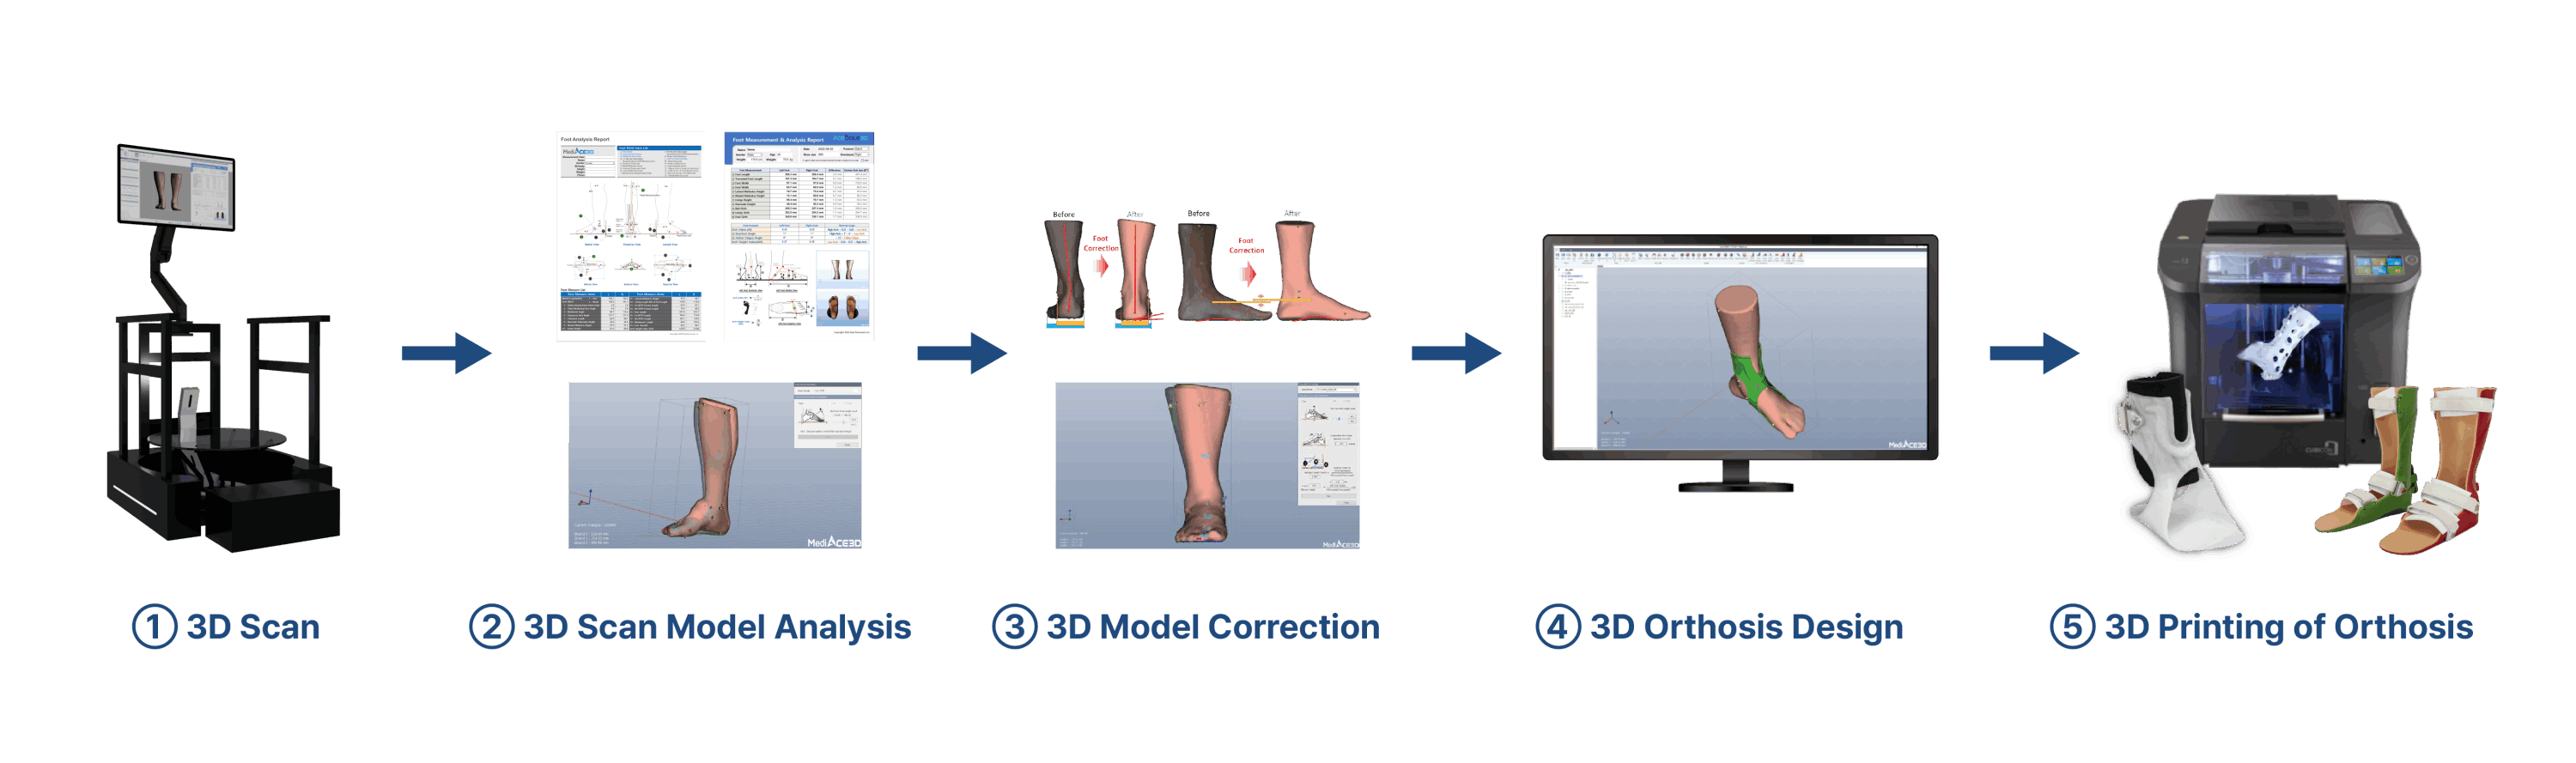 Additive Manufacturing System for Bespoke Orthosis